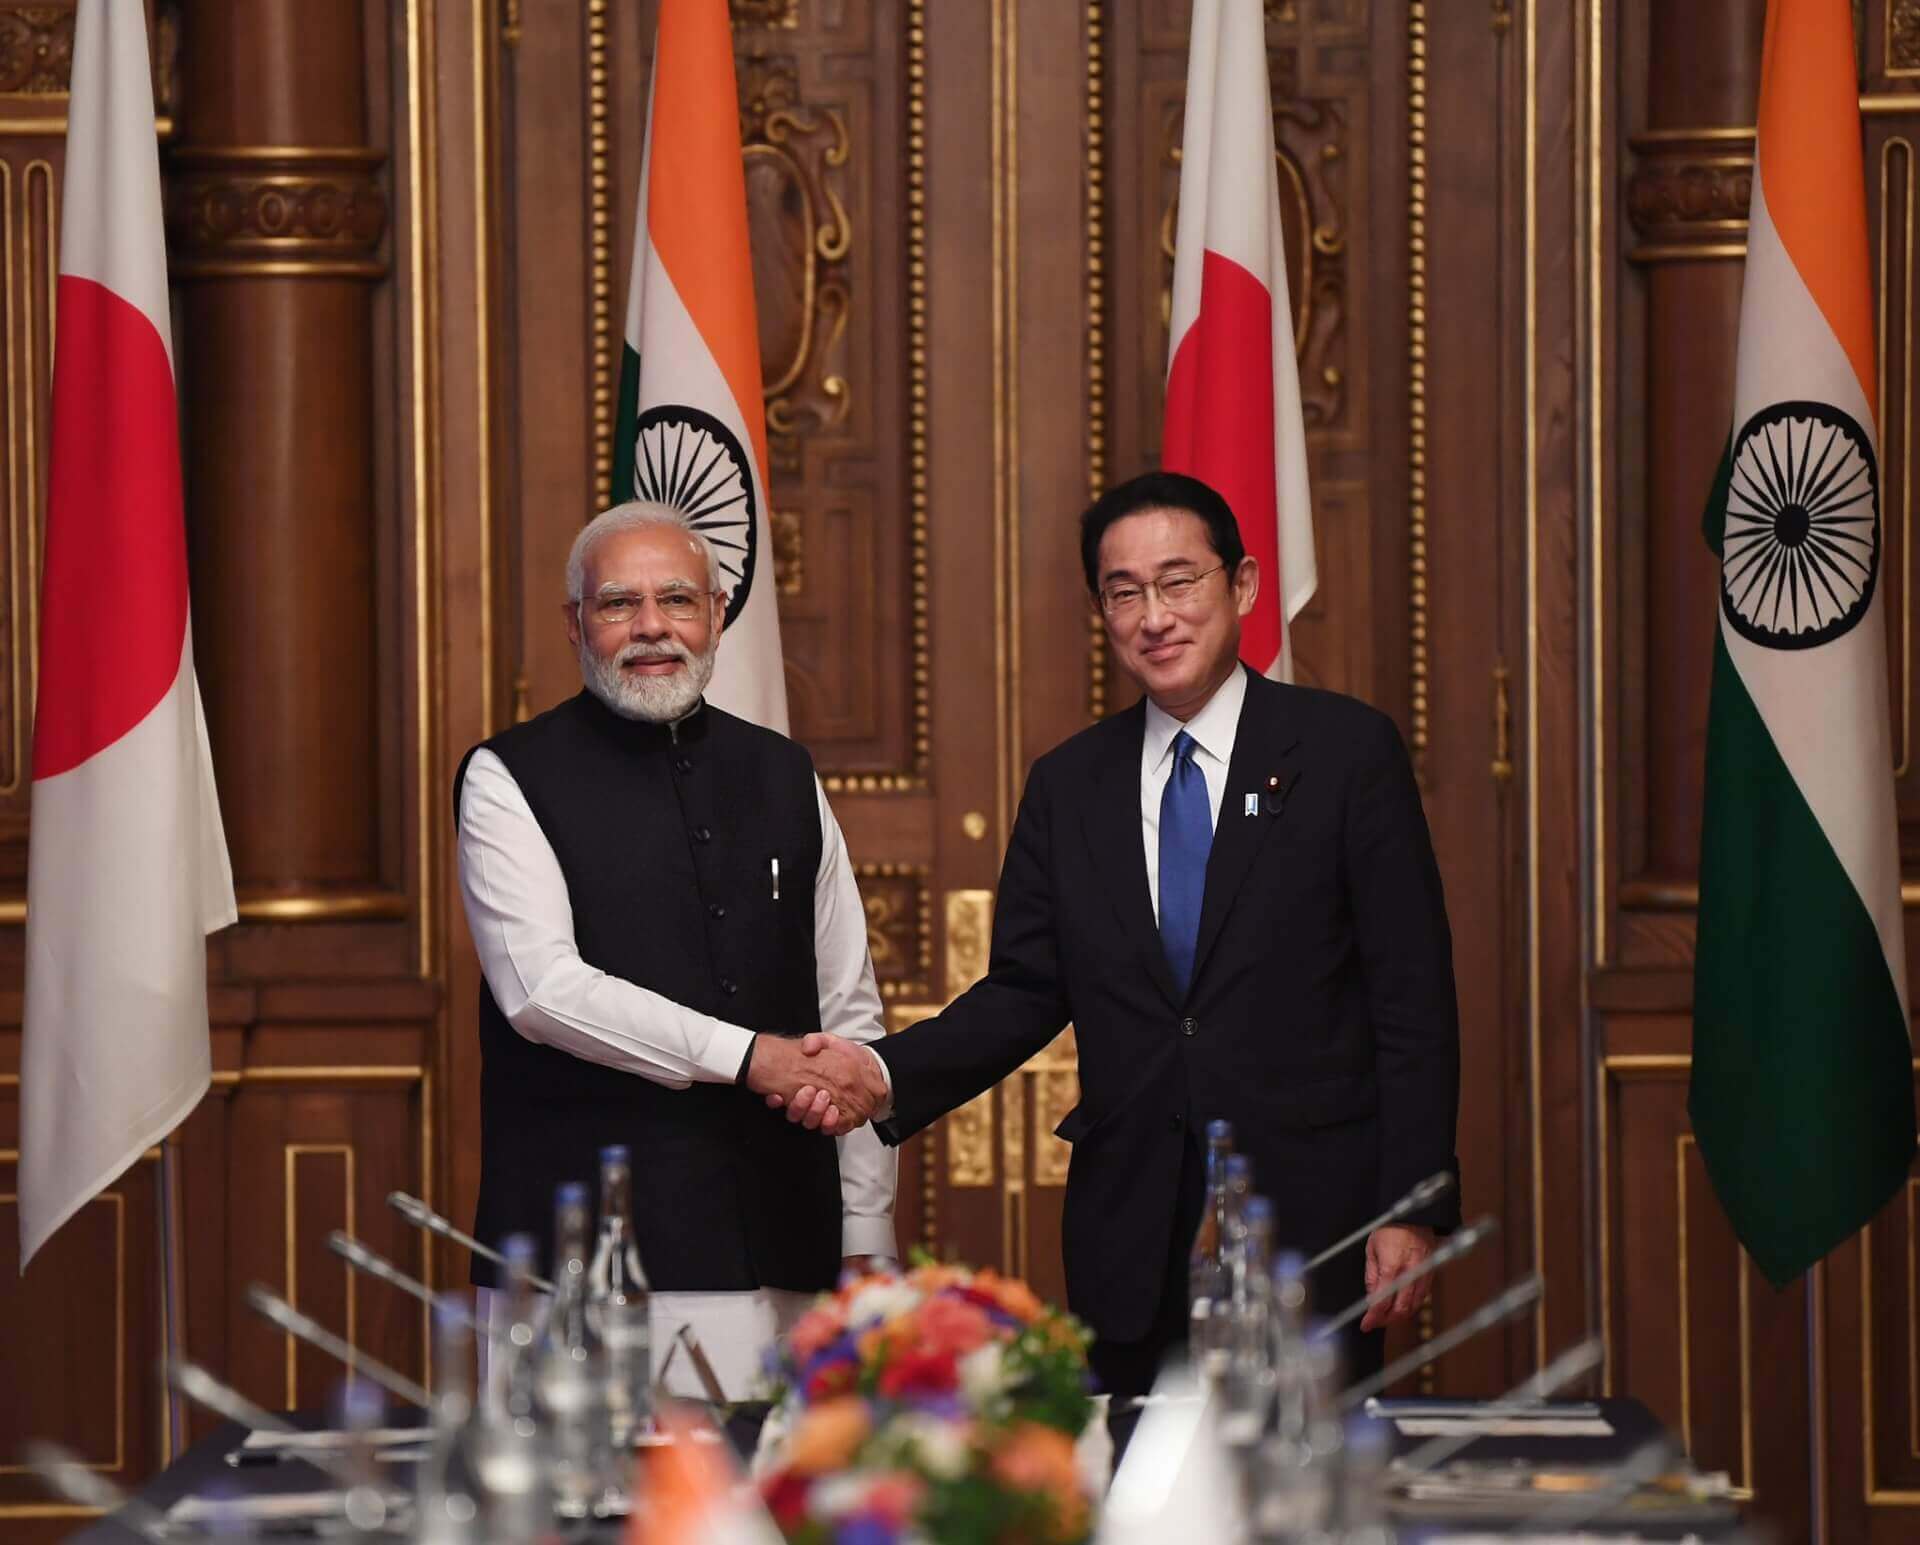 India and Japan Reaffirm Pledge to Create Free and Open Indo-Pacific